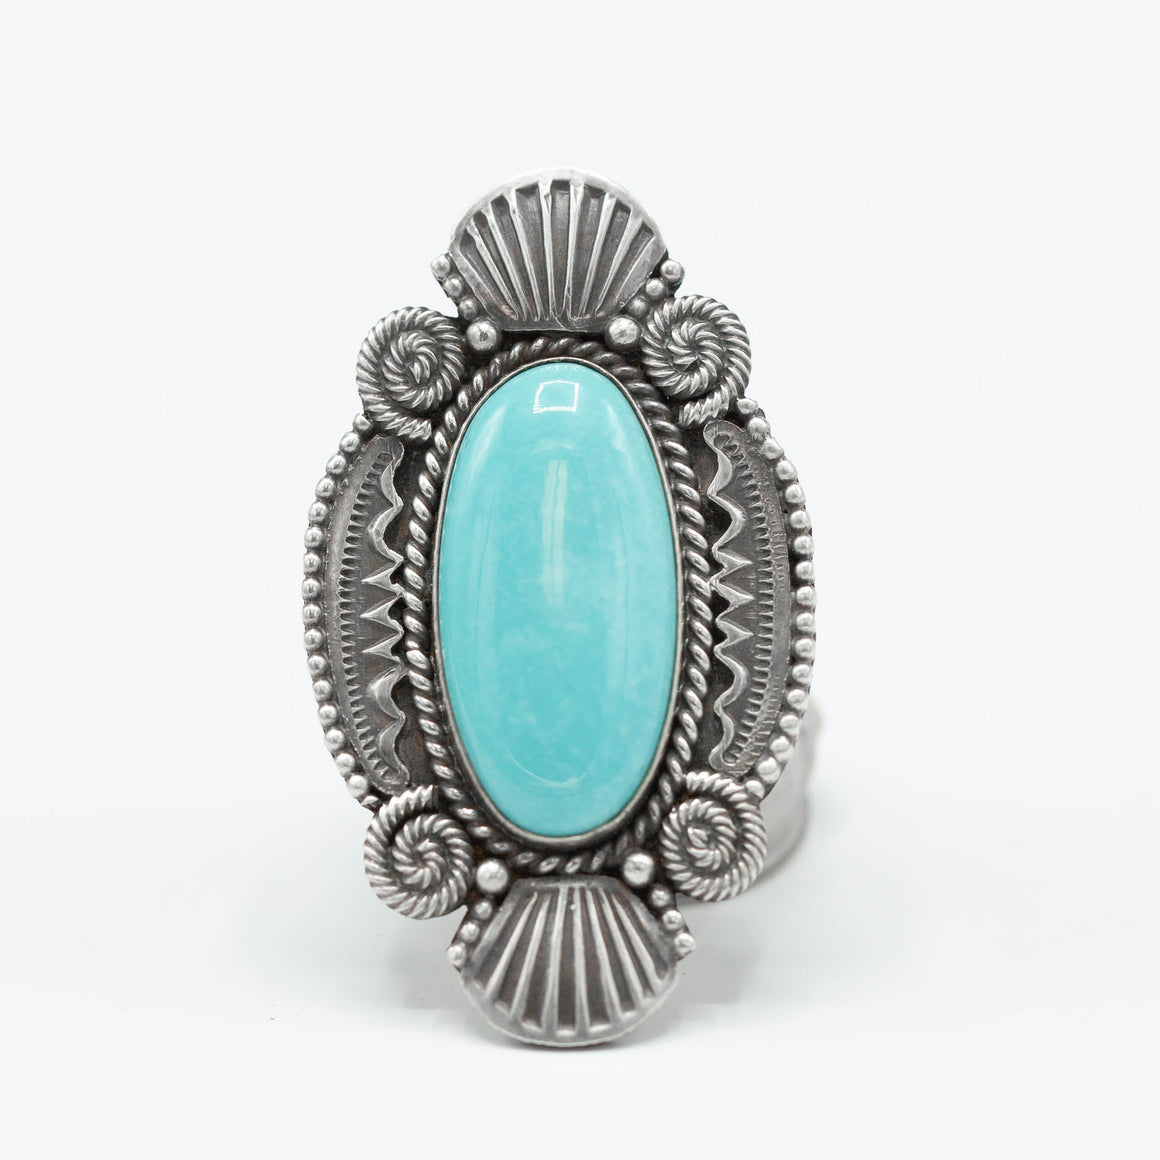 SW Sterling Silver Turquoise Ring with a Decorative Backplate